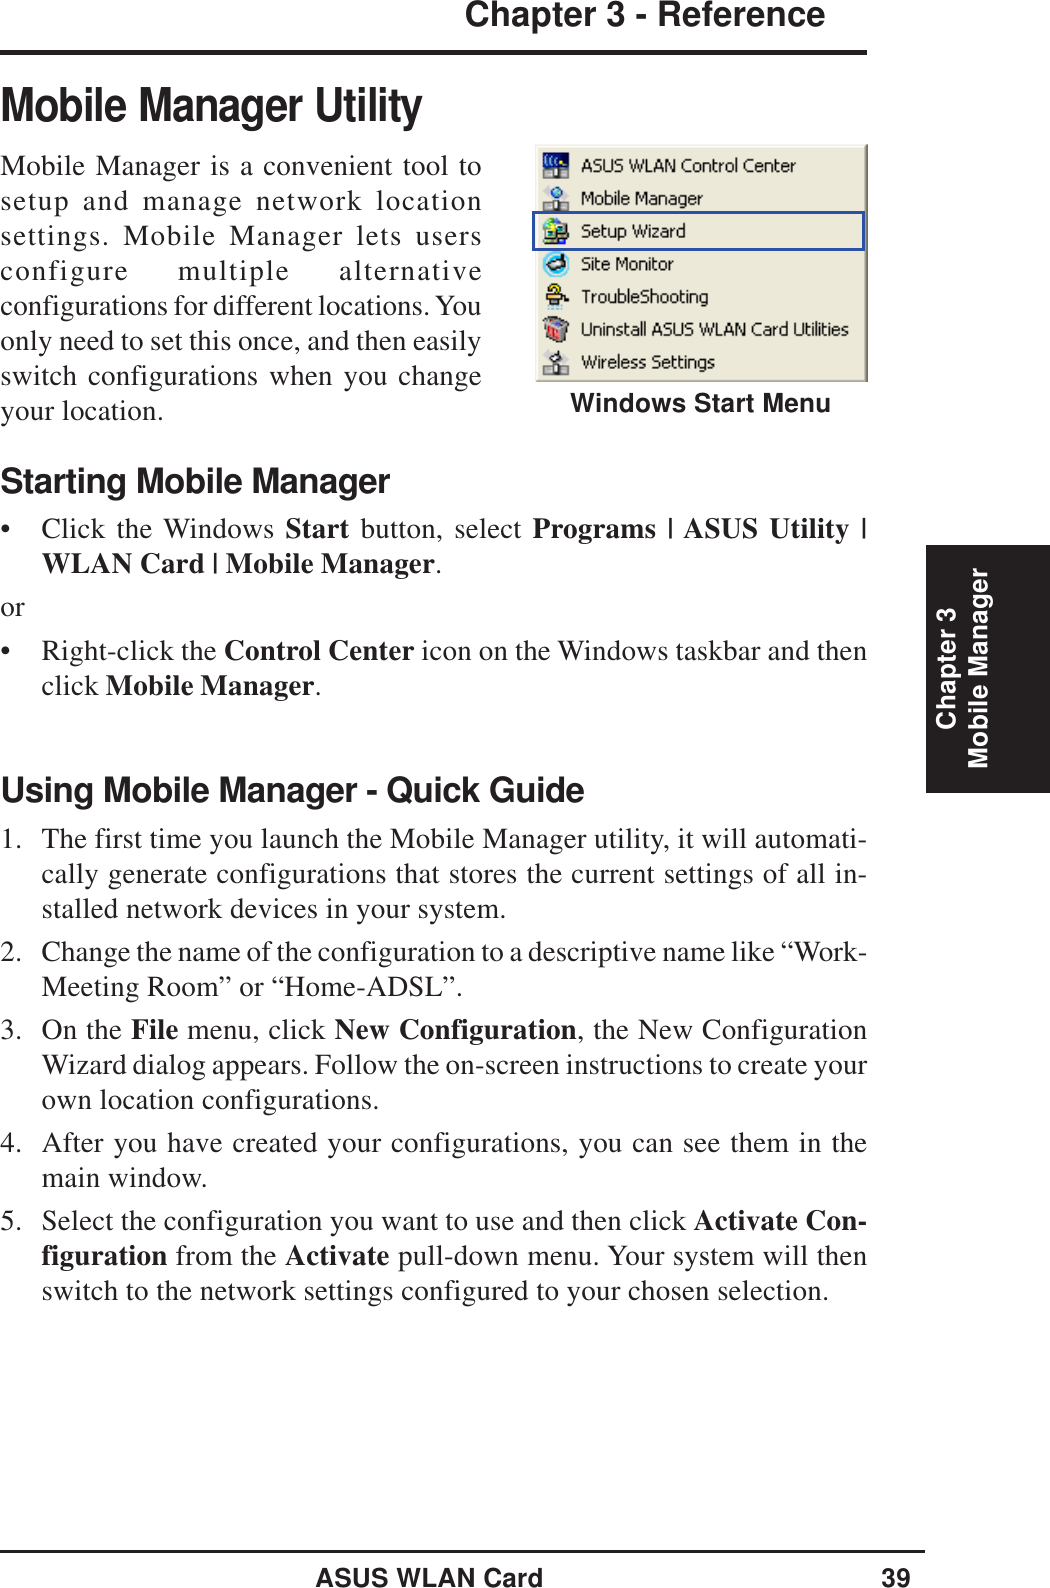 ASUS WLAN Card 39Chapter 3 - ReferenceChapter 3Mobile ManagerMobile Manager UtilityMobile Manager is a convenient tool tosetup and manage network locationsettings. Mobile Manager lets usersconfigure multiple alternativeconfigurations for different locations. Youonly need to set this once, and then easilyswitch configurations when you changeyour location.Starting Mobile Manager• Click the Windows Start button, select Programs | ASUS Utility |WLAN Card | Mobile Manager.or• Right-click the Control Center icon on the Windows taskbar and thenclick Mobile Manager.Using Mobile Manager - Quick Guide1. The first time you launch the Mobile Manager utility, it will automati-cally generate configurations that stores the current settings of all in-stalled network devices in your system.2. Change the name of the configuration to a descriptive name like “Work-Meeting Room” or “Home-ADSL”.3. On the File menu, click New Configuration, the New ConfigurationWizard dialog appears. Follow the on-screen instructions to create yourown location configurations.4. After you have created your configurations, you can see them in themain window.5. Select the configuration you want to use and then click Activate Con-figuration from the Activate pull-down menu. Your system will thenswitch to the network settings configured to your chosen selection.Windows Start Menu